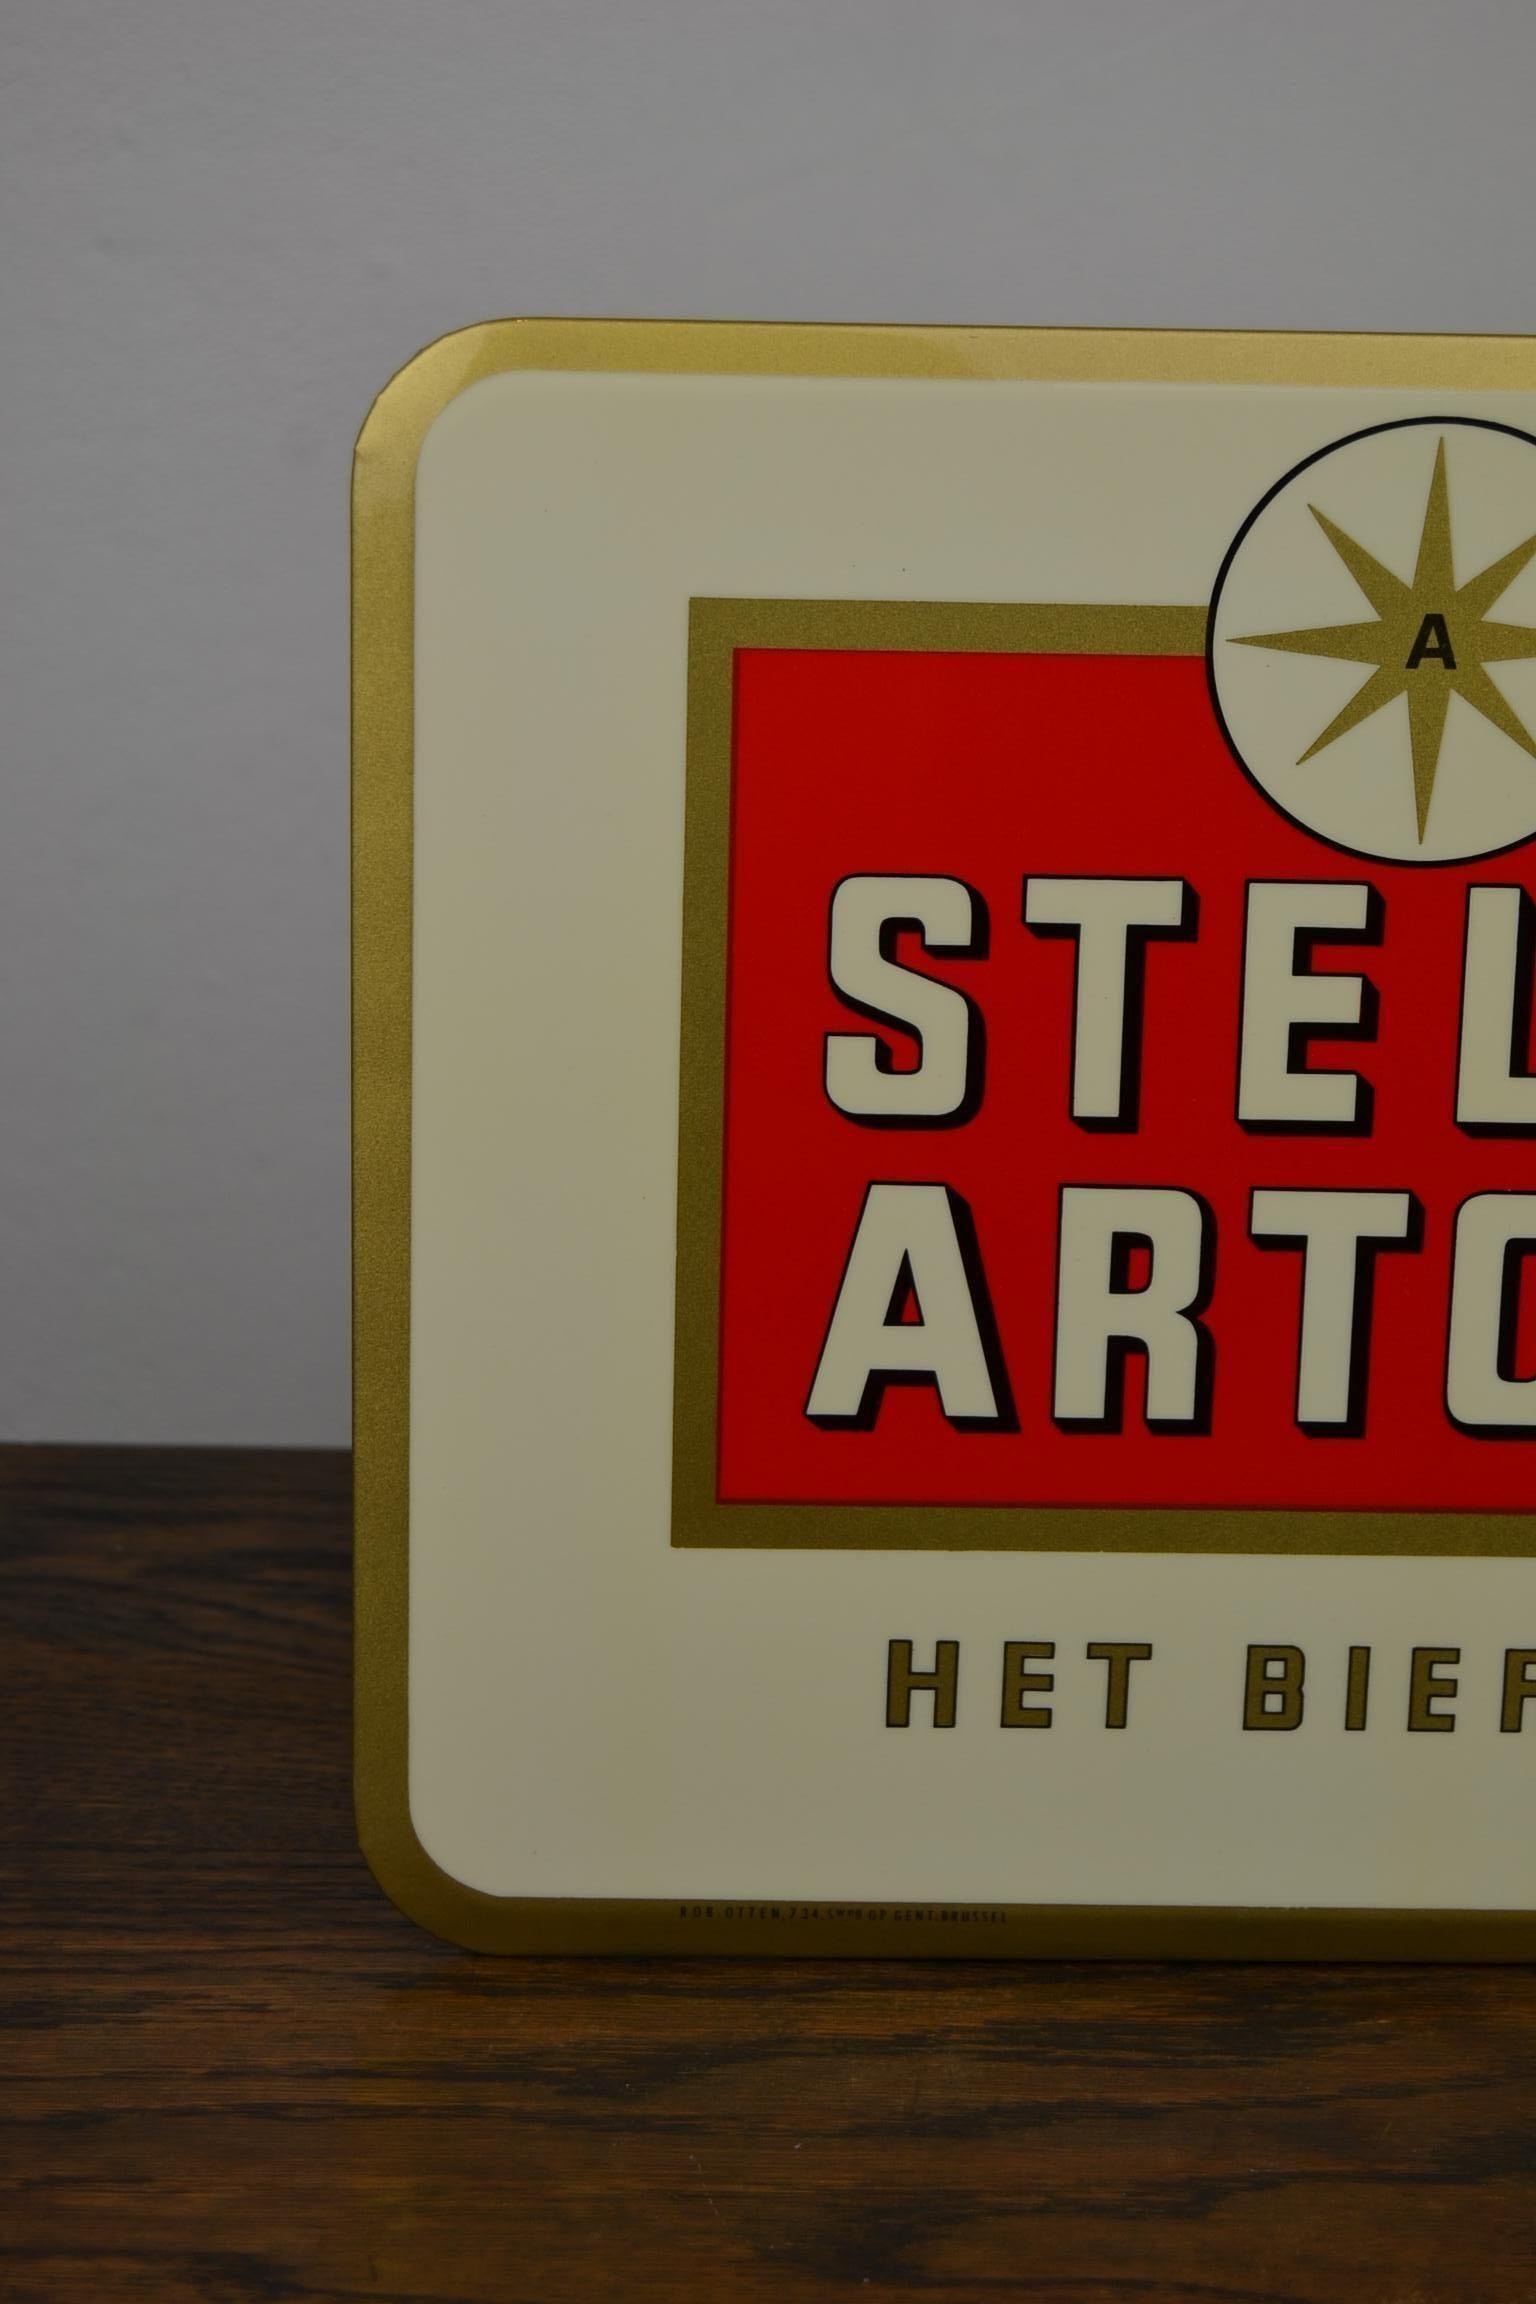 1960s Belgian Beer sign for the Beer Brand Stella Artois.
This Beer Sign is mounted on Cardboard. 
With tax stamp at the back.
It was made by the Company Rob Otten, which was located in Brussels.
Great design : a typical ribbed glass of Stella